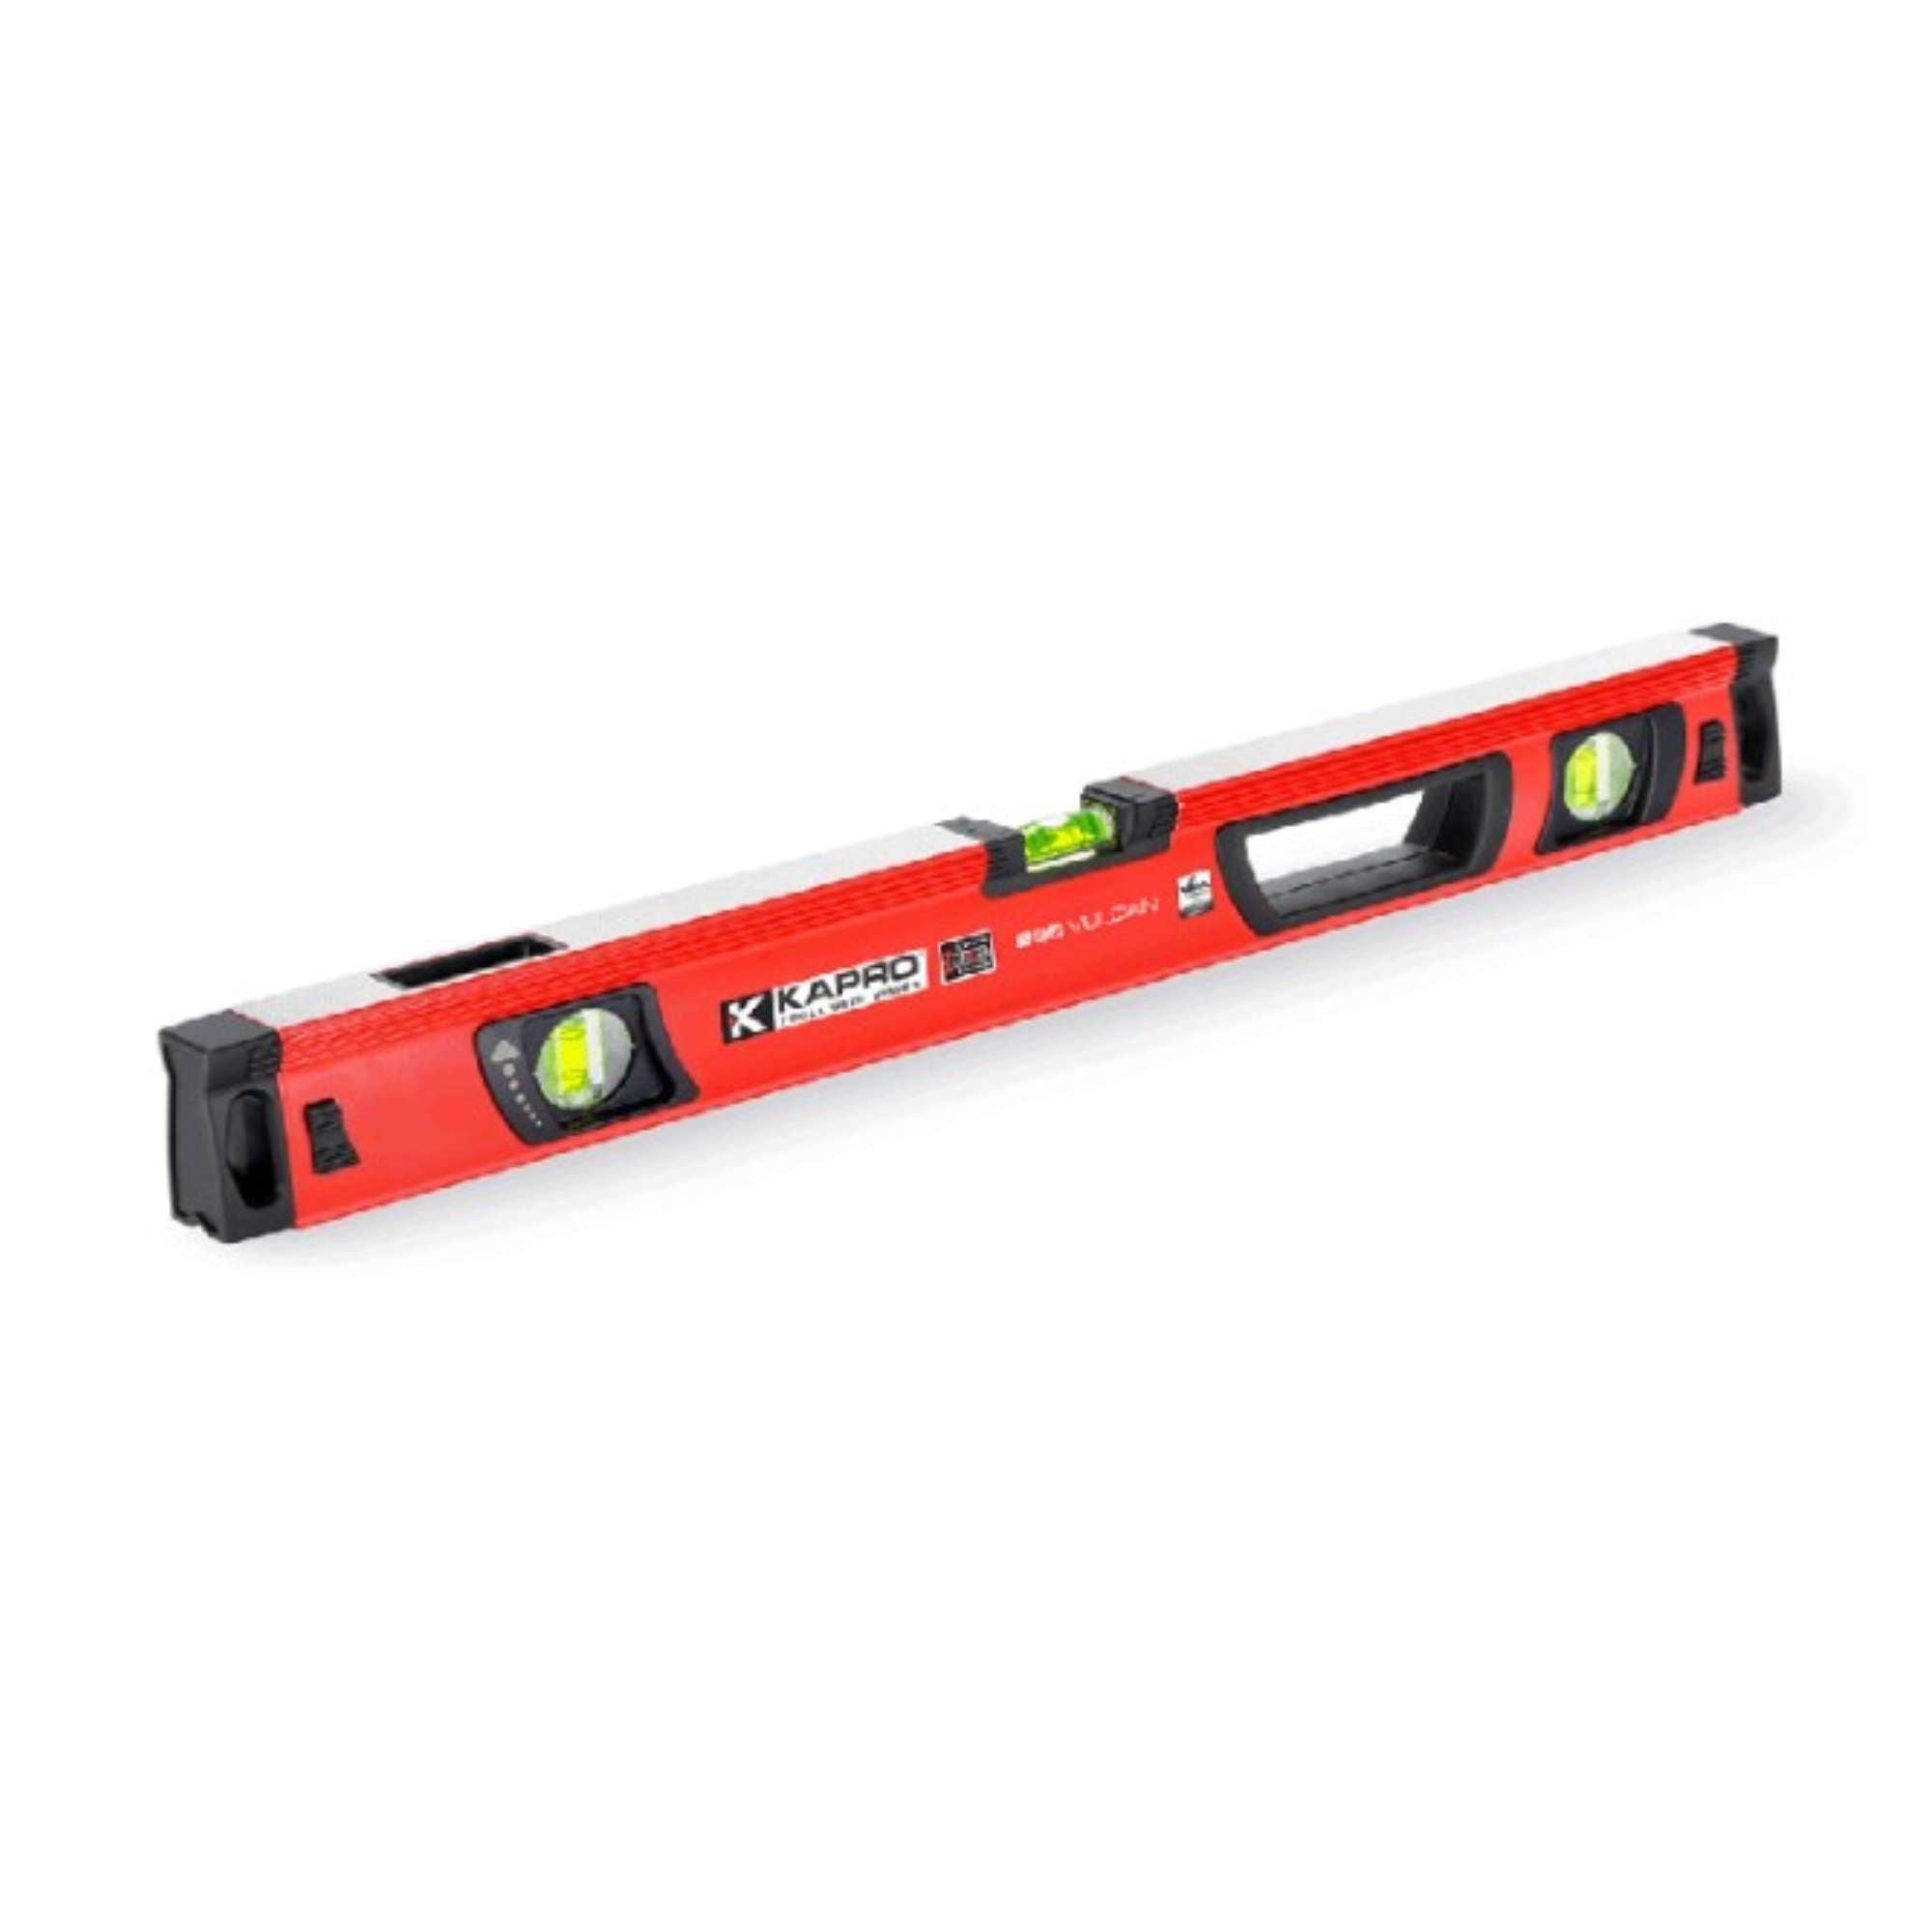 100cm spirit level with slope indicator up to 2% and vertical KAPRO